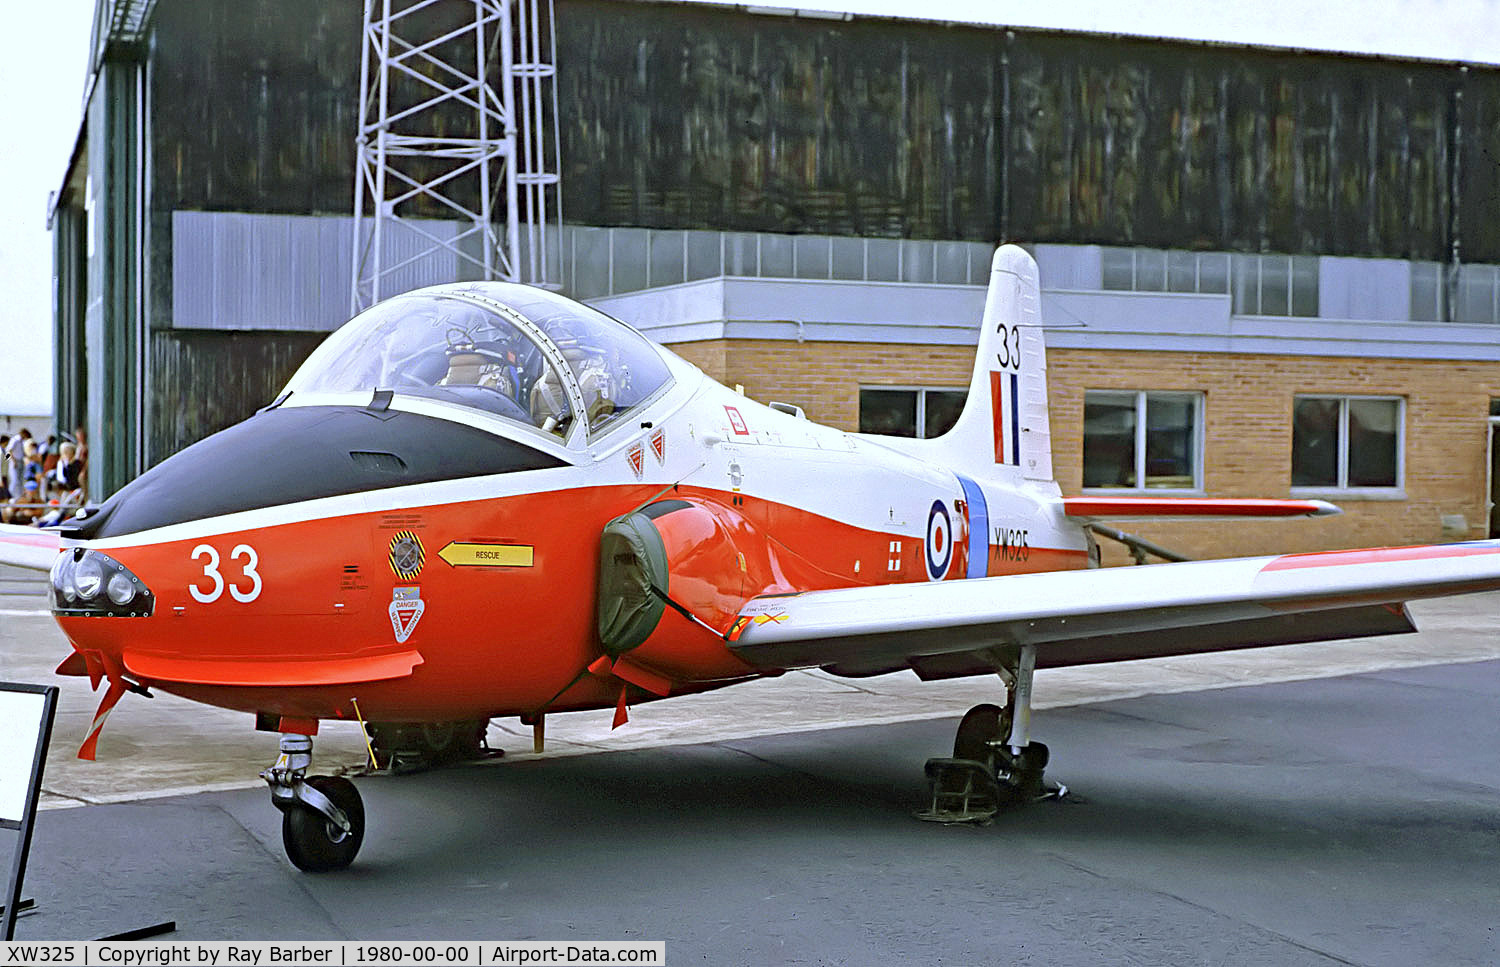 XW325, 1970 BAC 84 Jet Provost T.5A C/N EEP/JP/989, XW325   BAC Jet Provost T.5A [EEP/JP/989] (Royal Air Force) (Place & Date unknown) @ 1980's